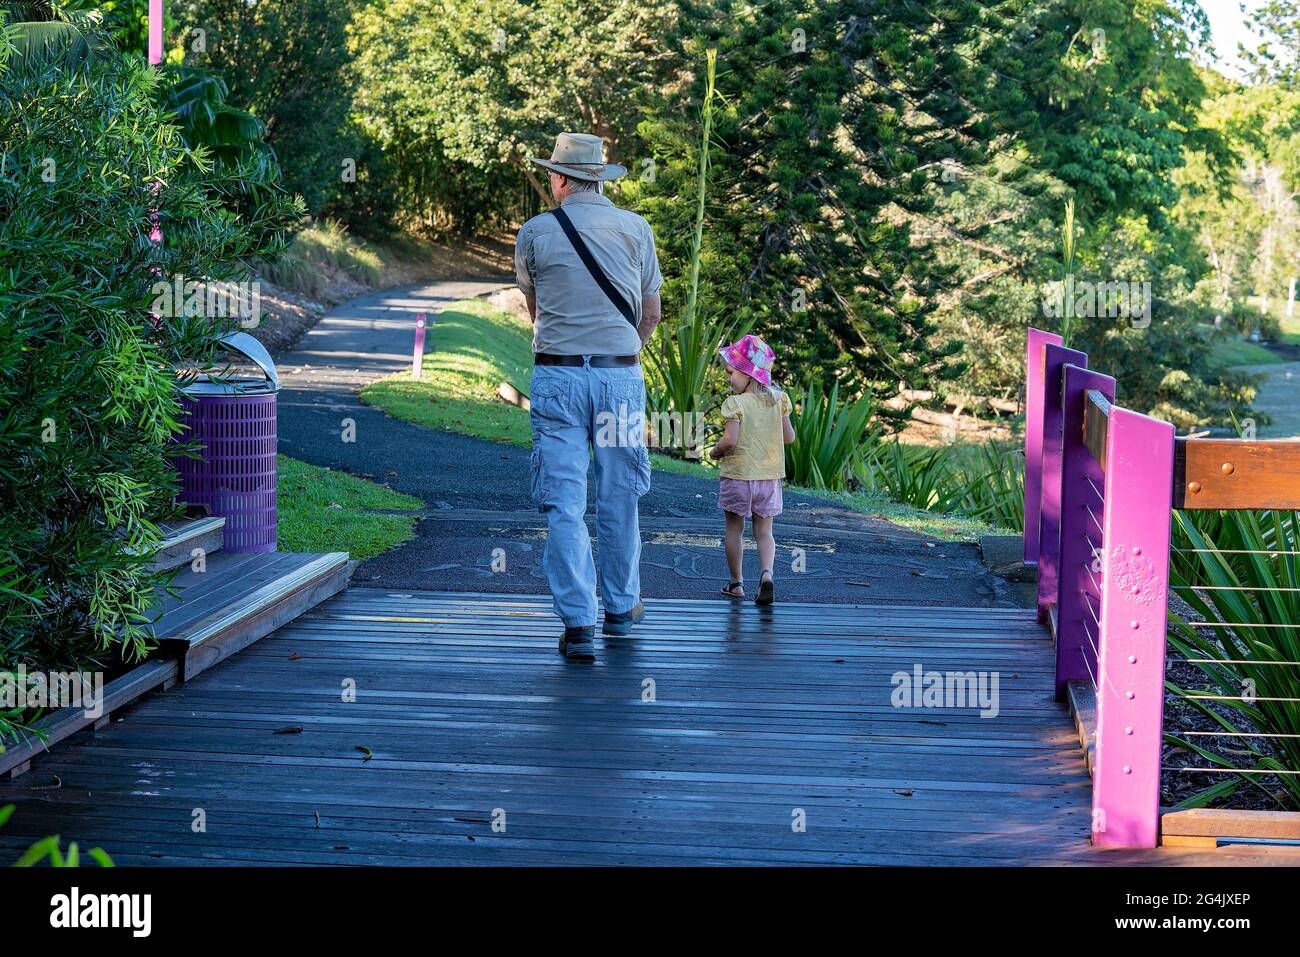 Mackay, Queensland, Australia - June 2021: Grandfather walking with his little granddaughter in the botanic gardens in early morning shadows Stock Photo